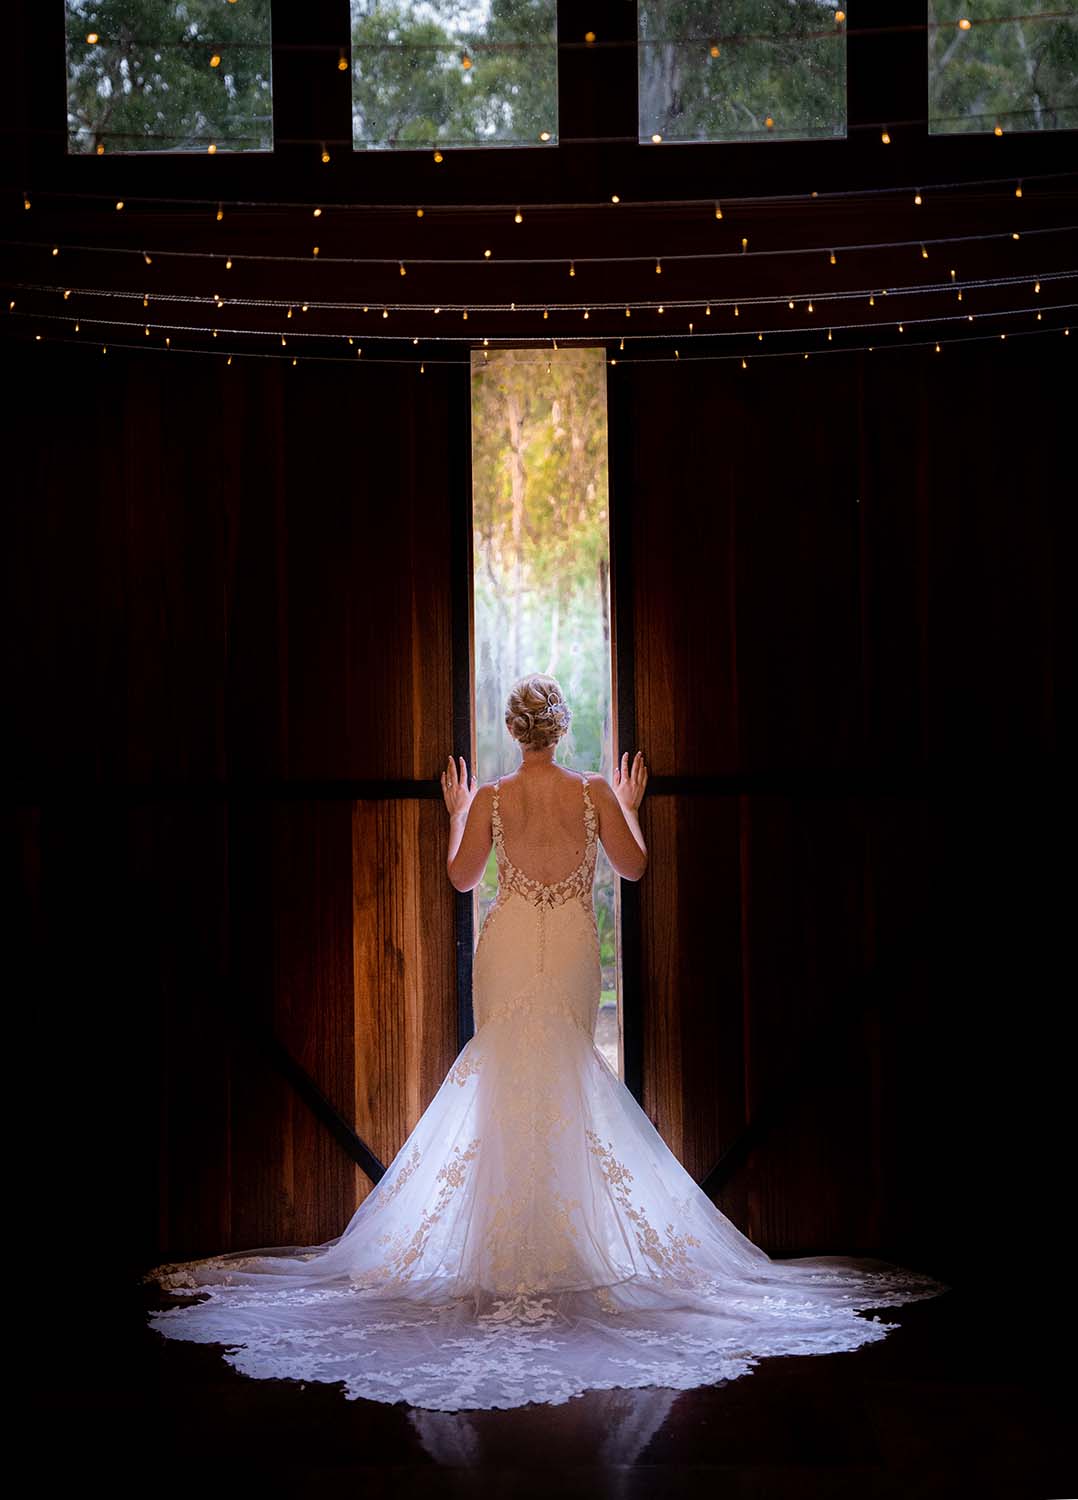 Wedding Photography - Brides gown